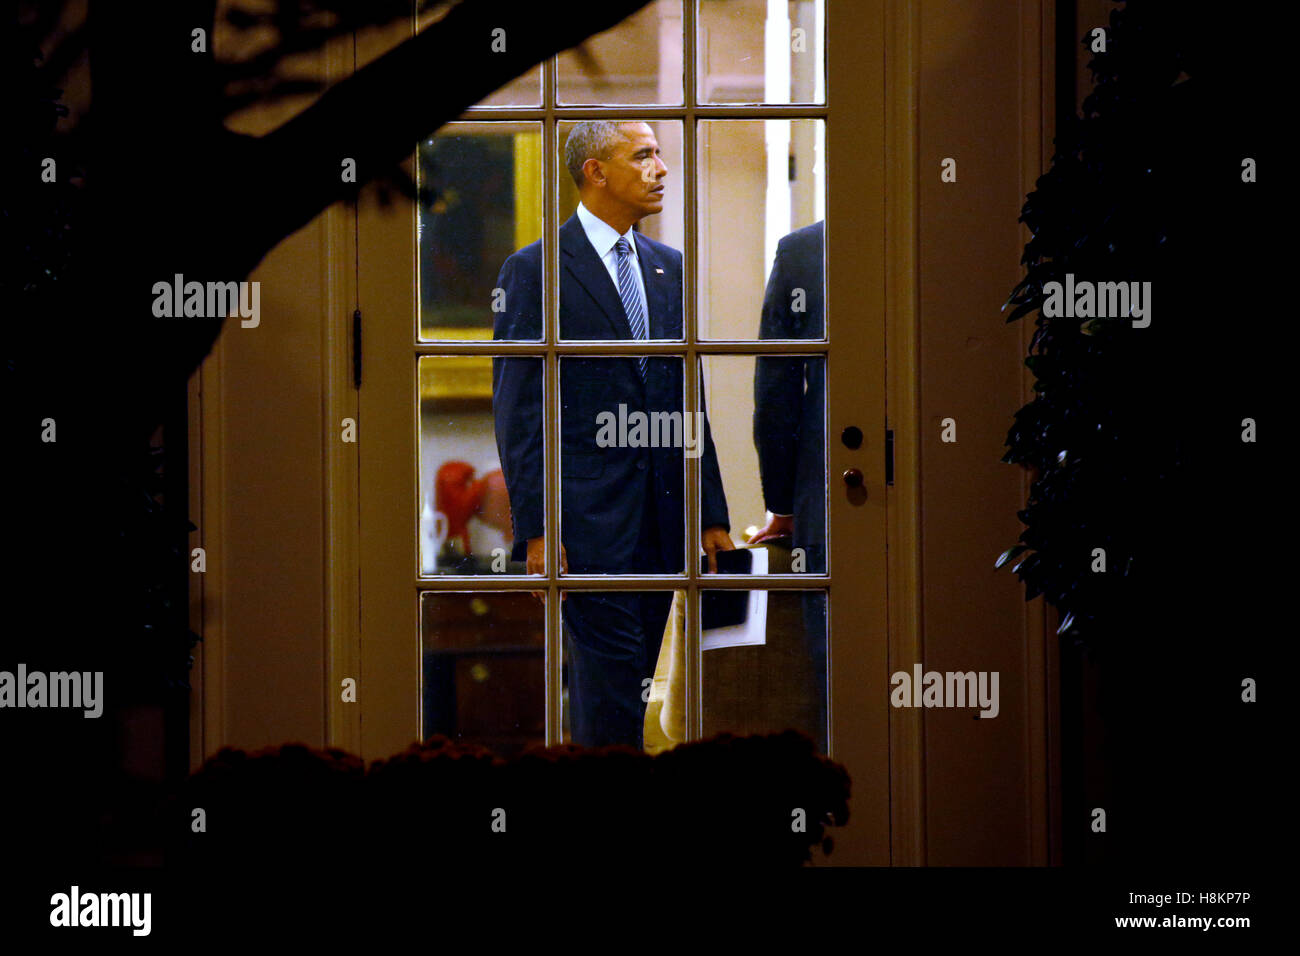 US President Barack Obama talks in the Oval Office prior to his departure aboard Marine One on the South Lawn of the White House in Washington, DC, USA, 14 November 2016. President Obama is traveling overseas to Greece, Germany and Peru. Credit: Shawn Thew / Pool via CNP    - NO WIRE SERVICE - Stock Photo